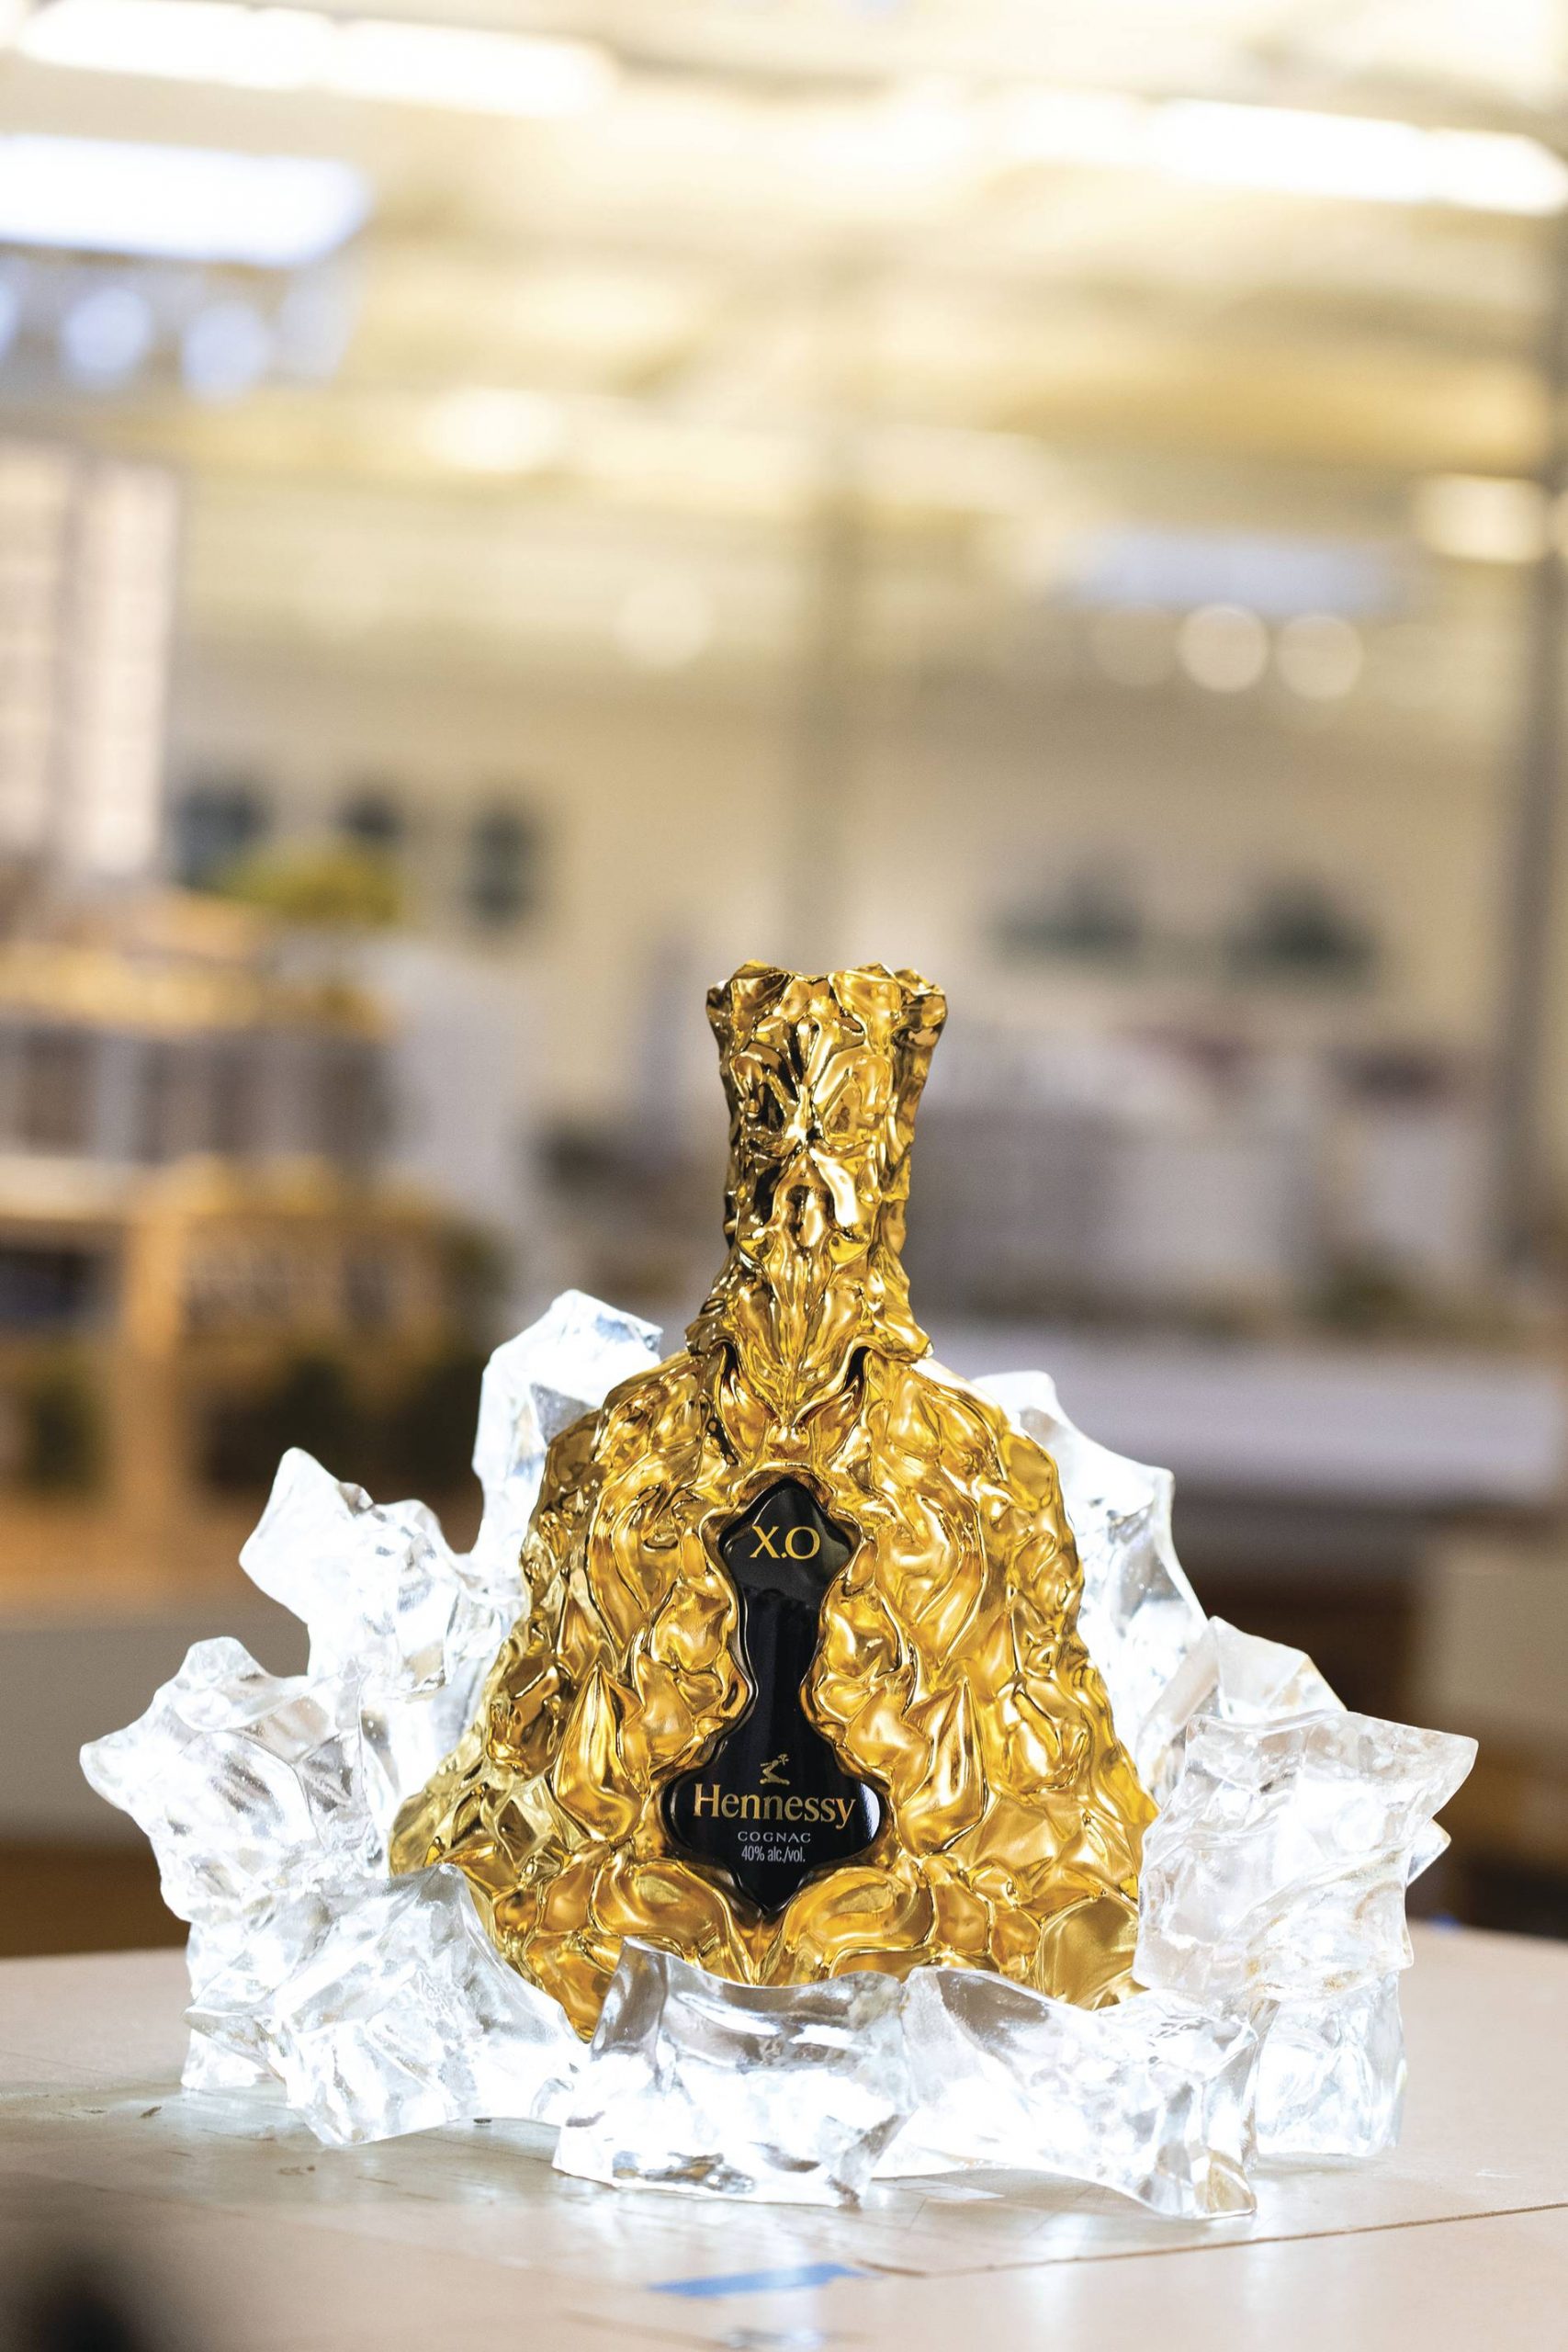 Maison Hennessy Celebrates 150 Years With A Glitzy Decanter Design By Frank Gehry photo